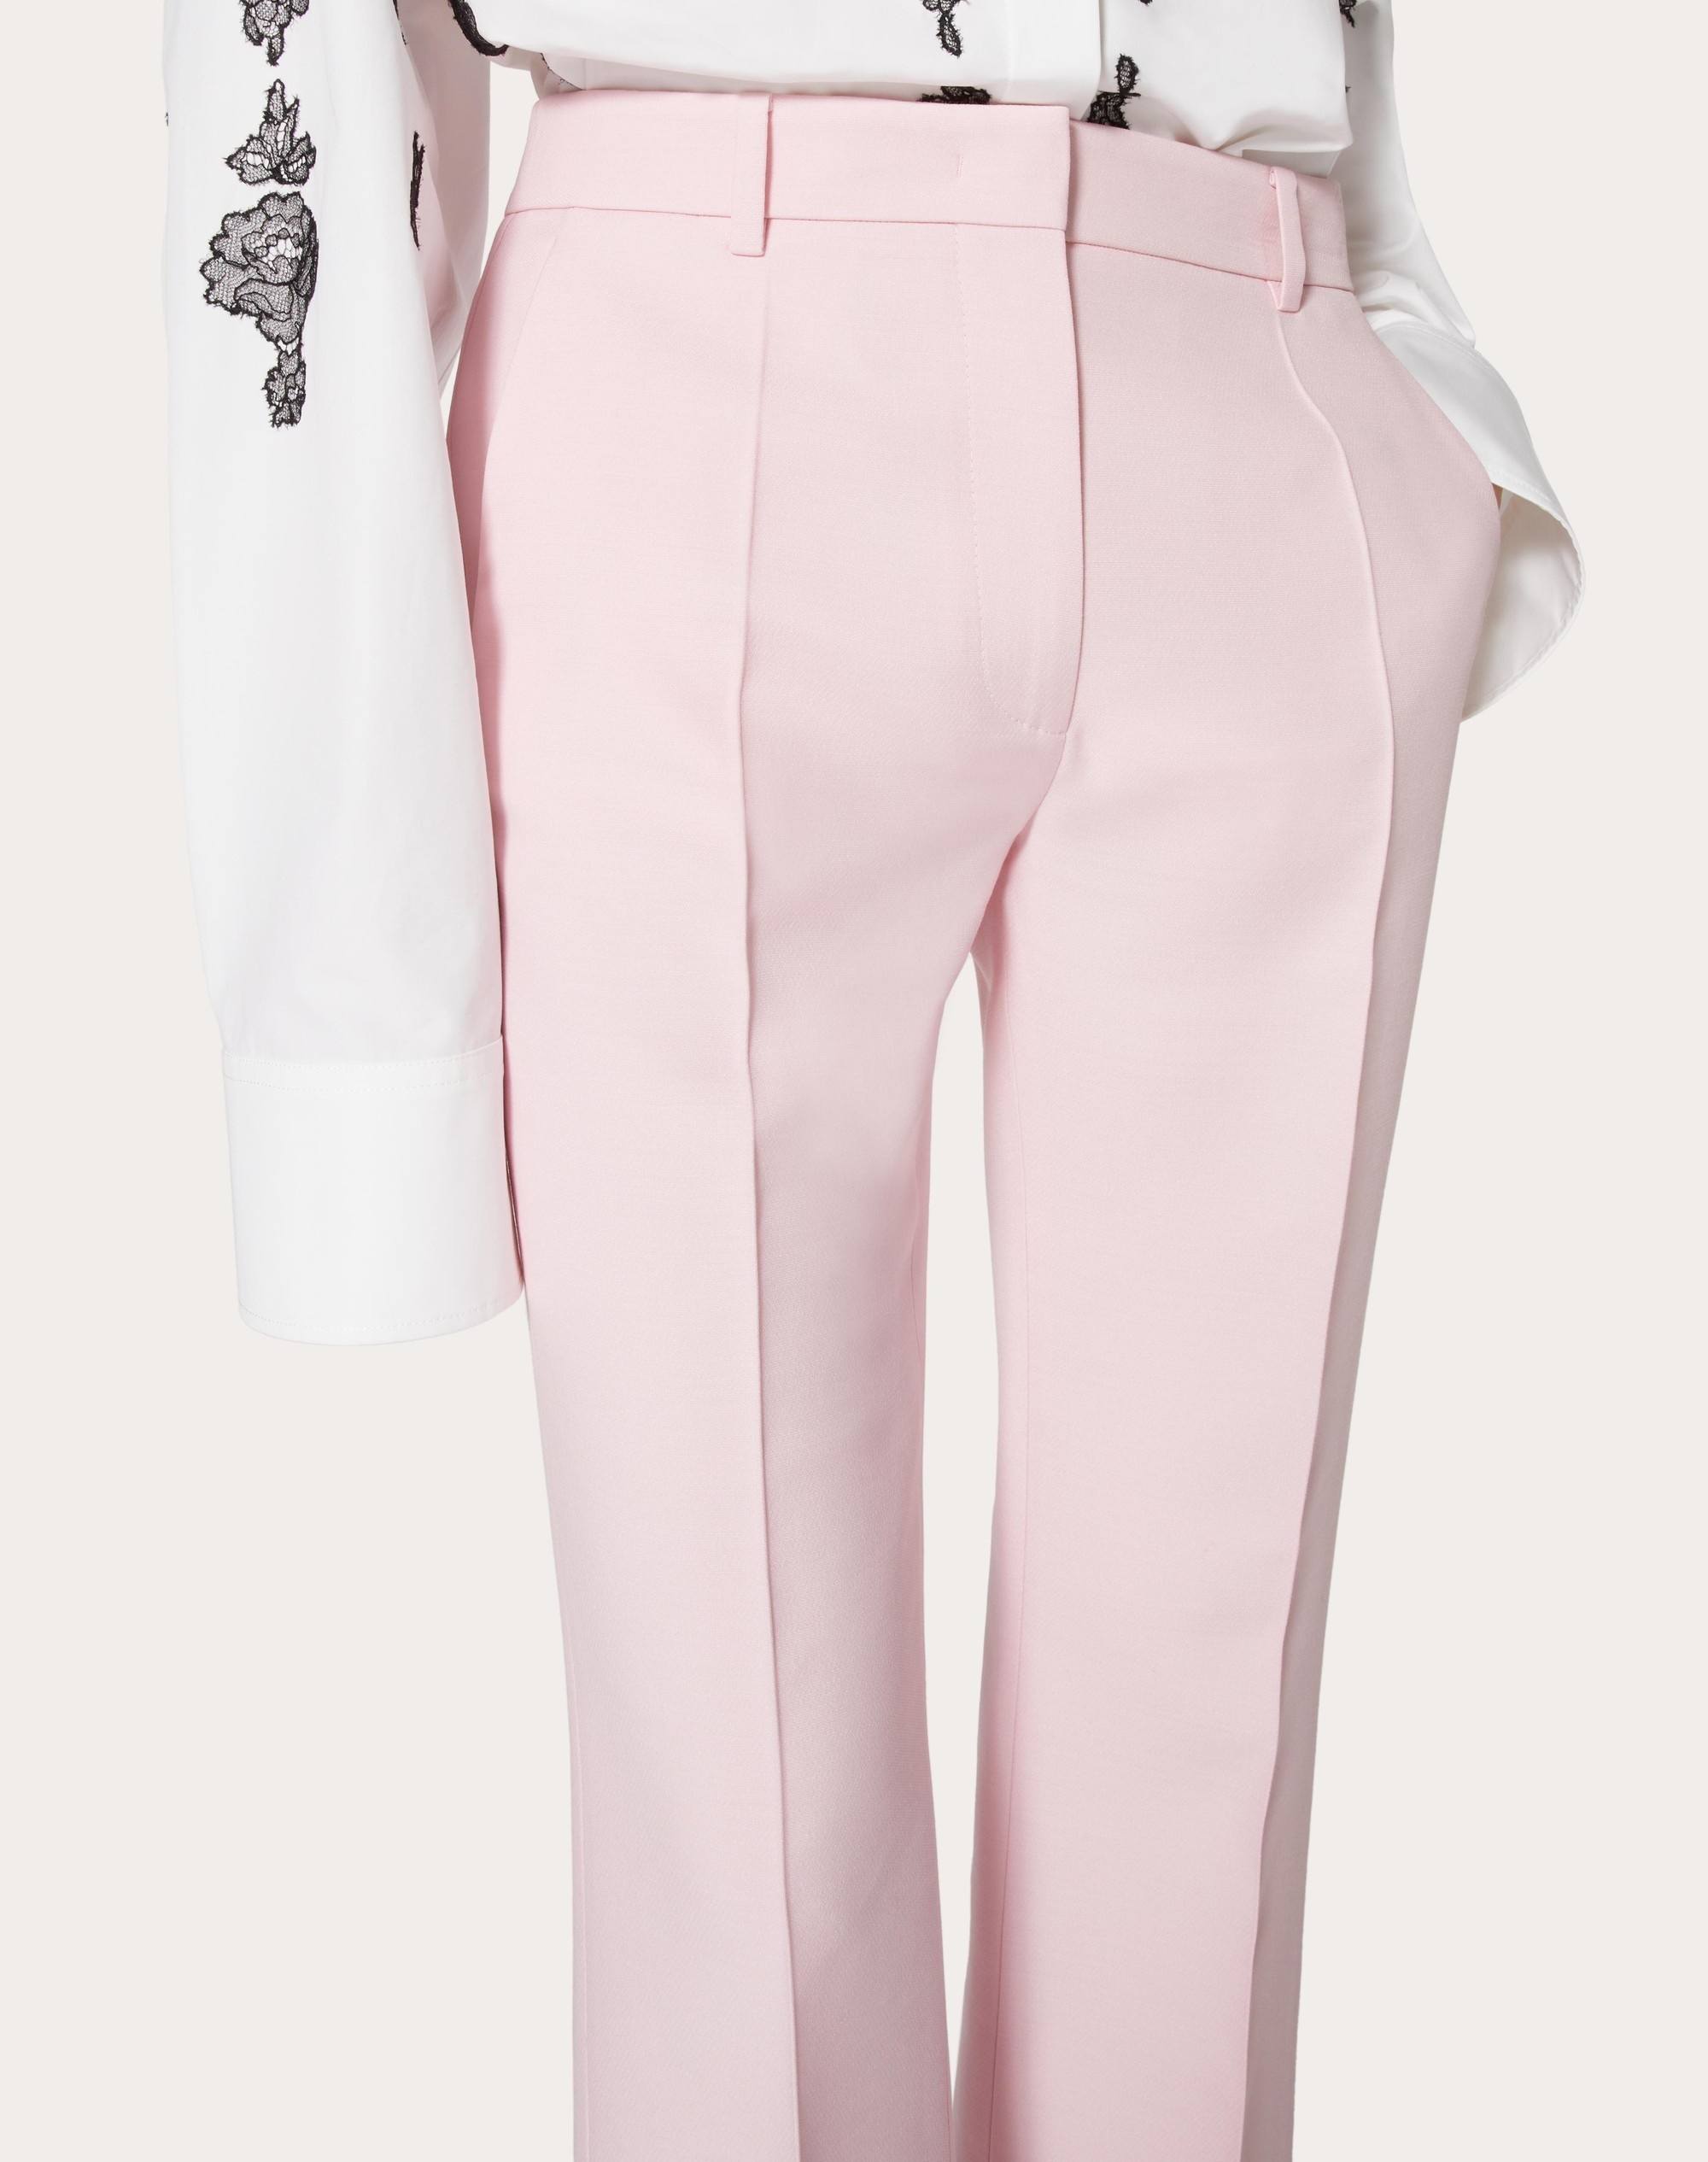 CREPE COUTURE TROUSERS - 5